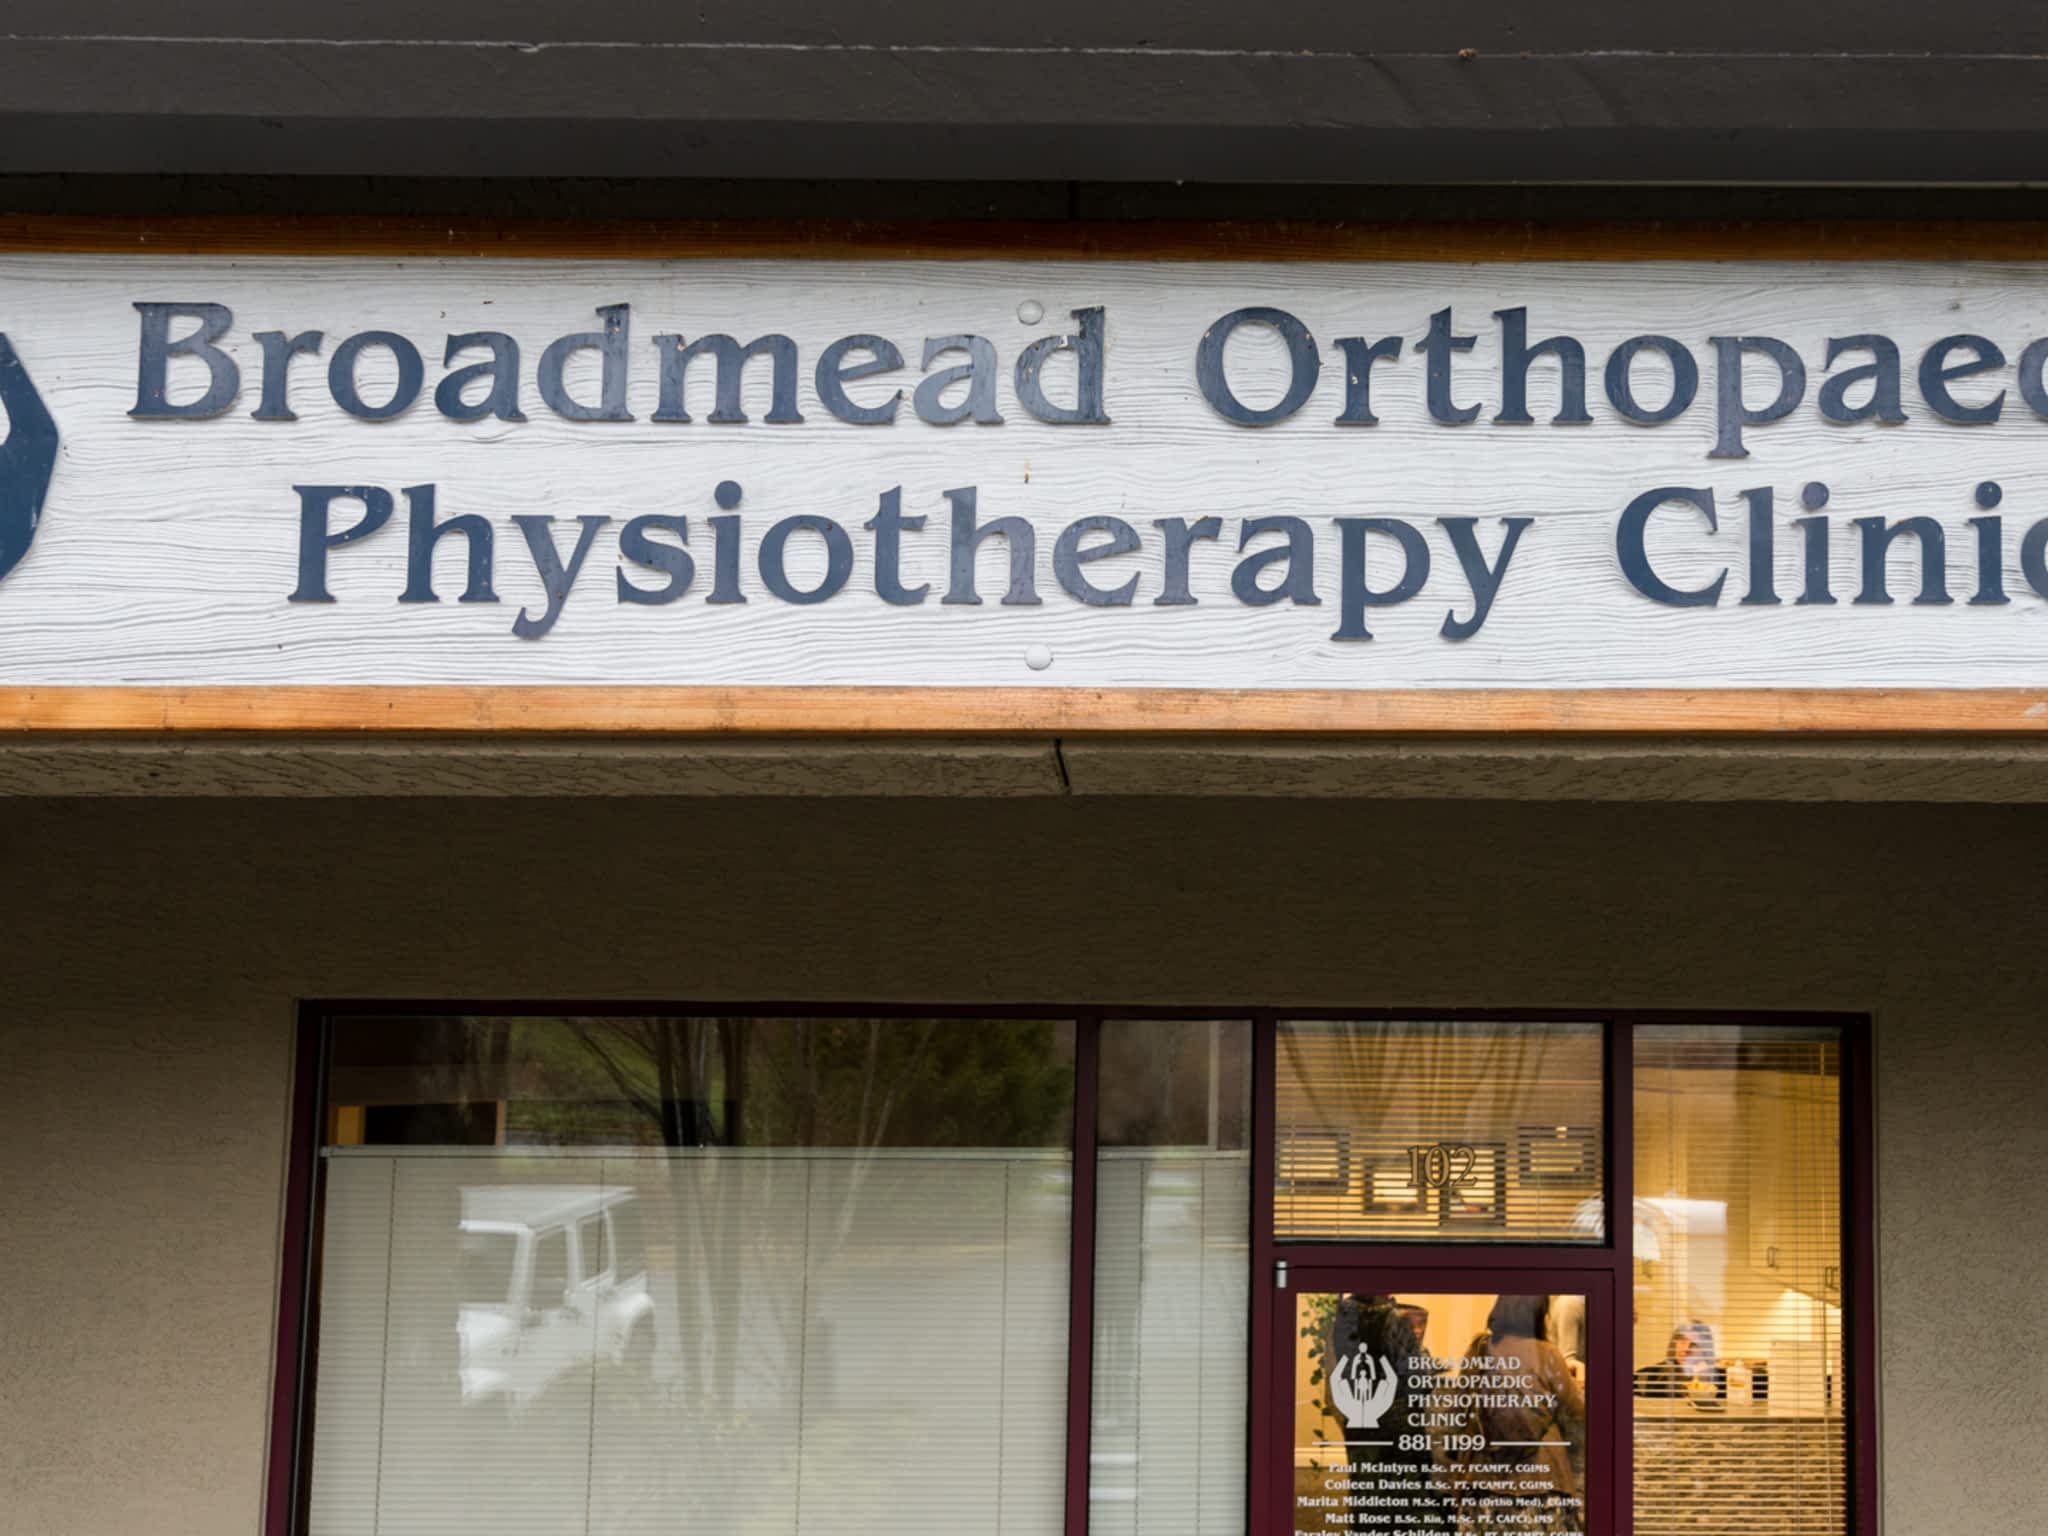 photo Broadmead Orthopaedic Physiotherapy Clinic